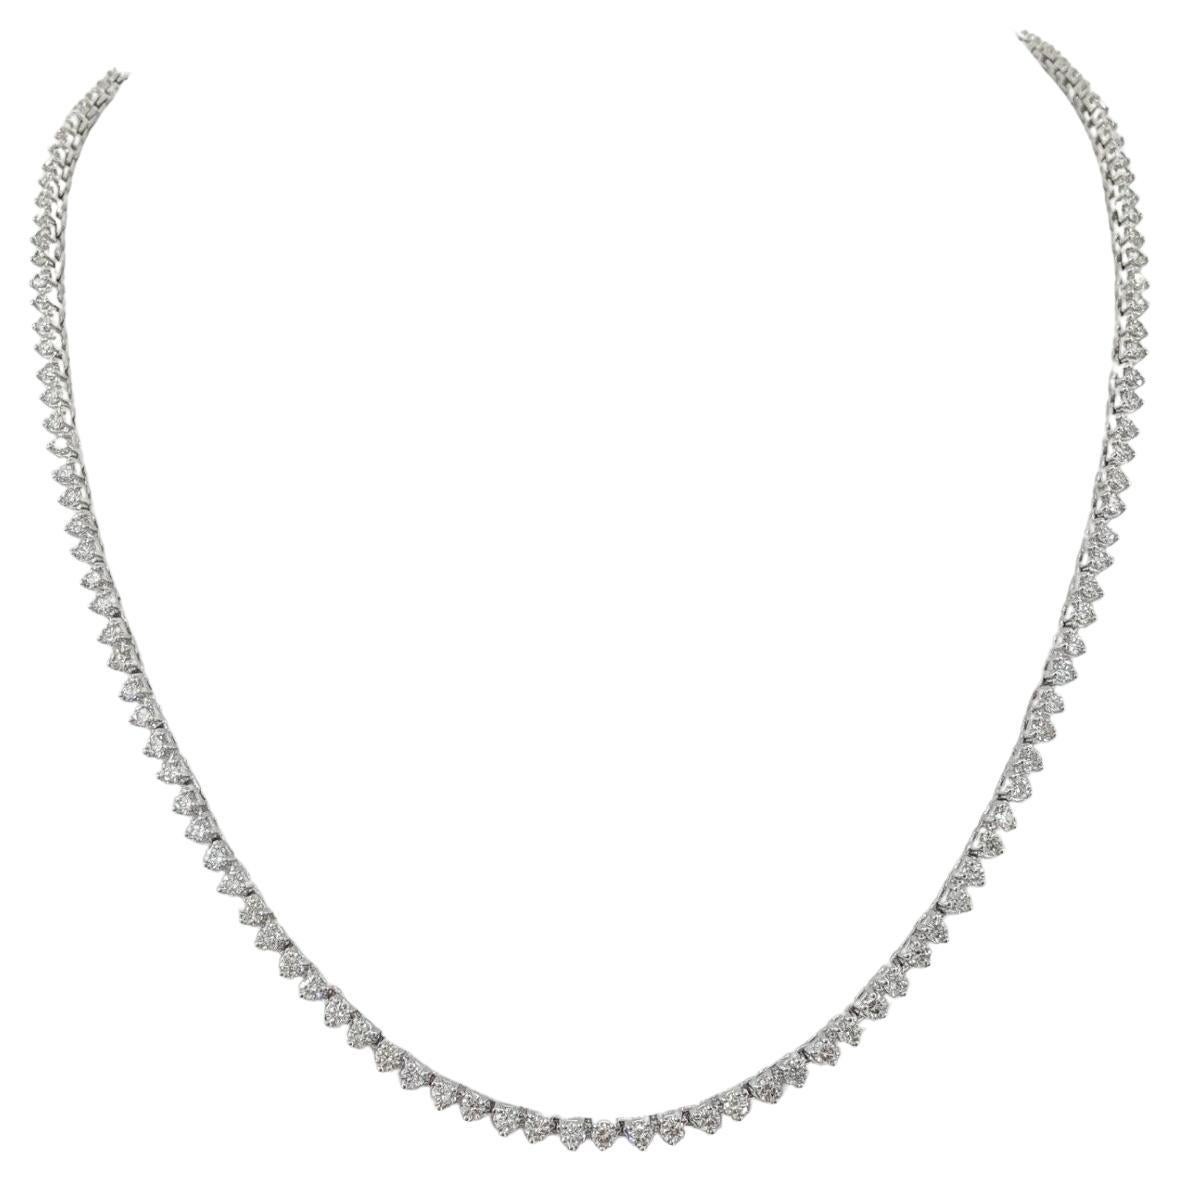 5.41 Carat Total Weight Round Brilliant Cut Diamonds Necklace For Sale